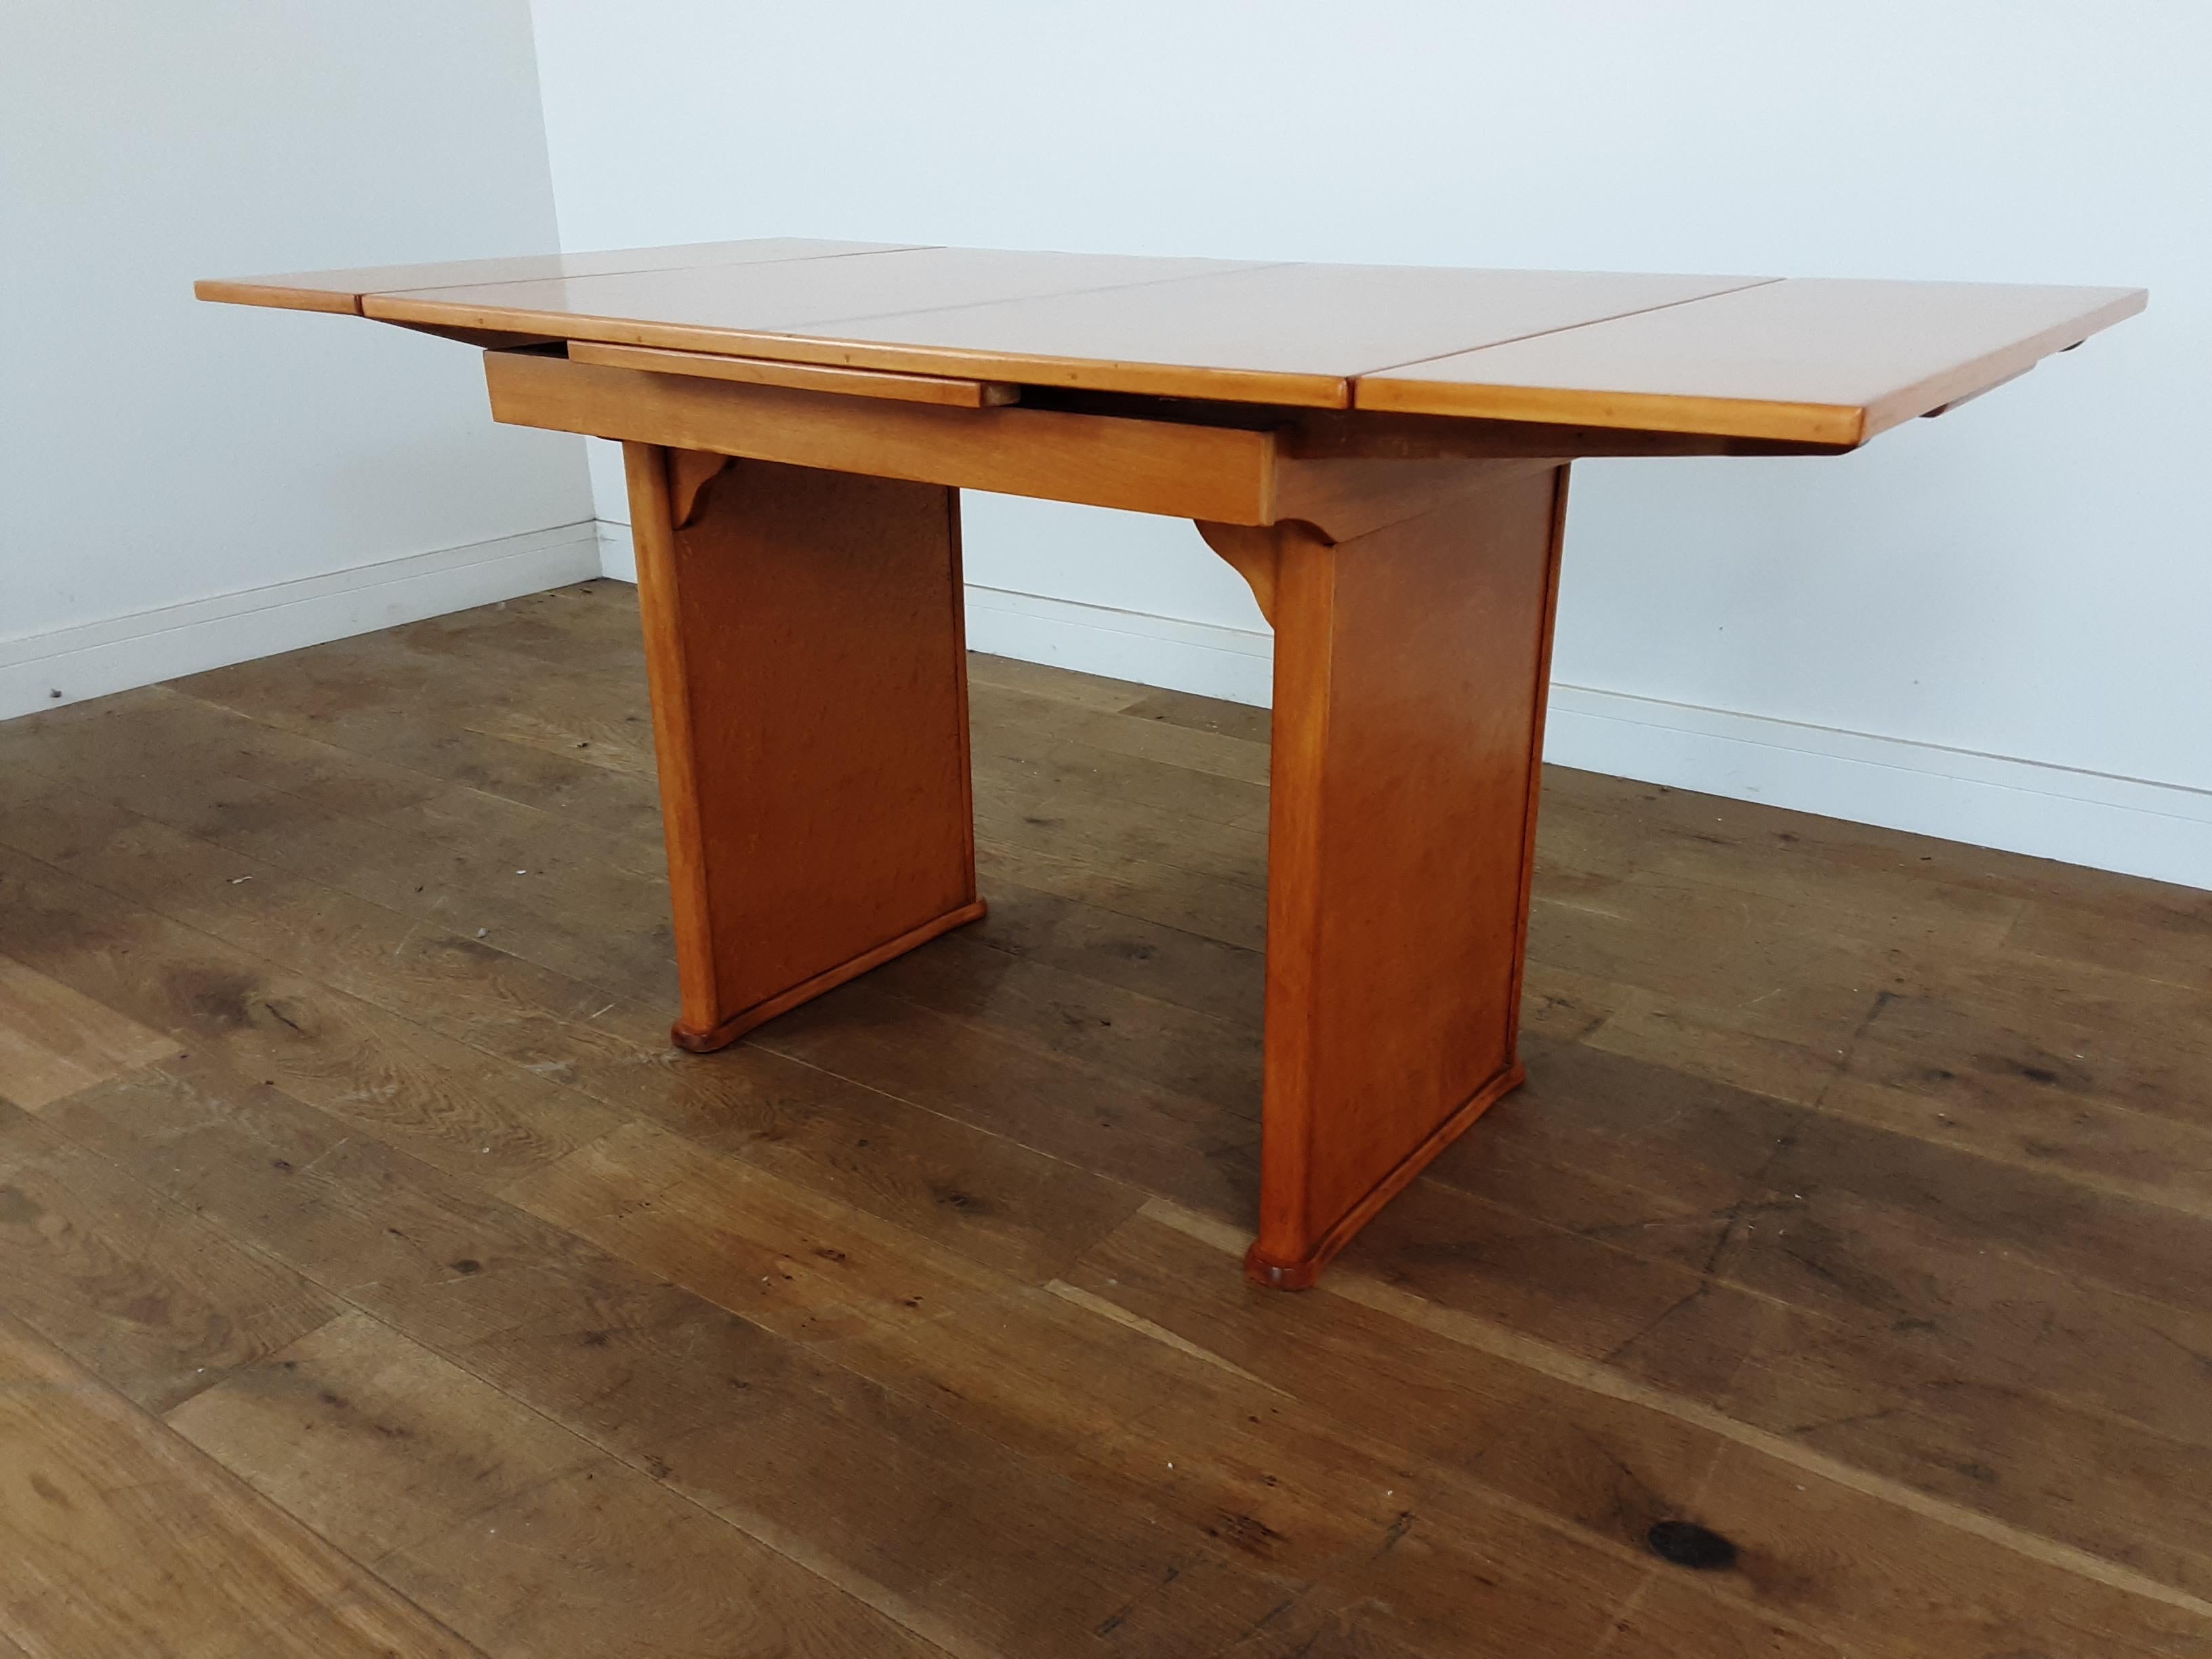 20th Century British Art Deco Extendable Dining Table in Bird's-Eye Maple with Walnut Trims For Sale